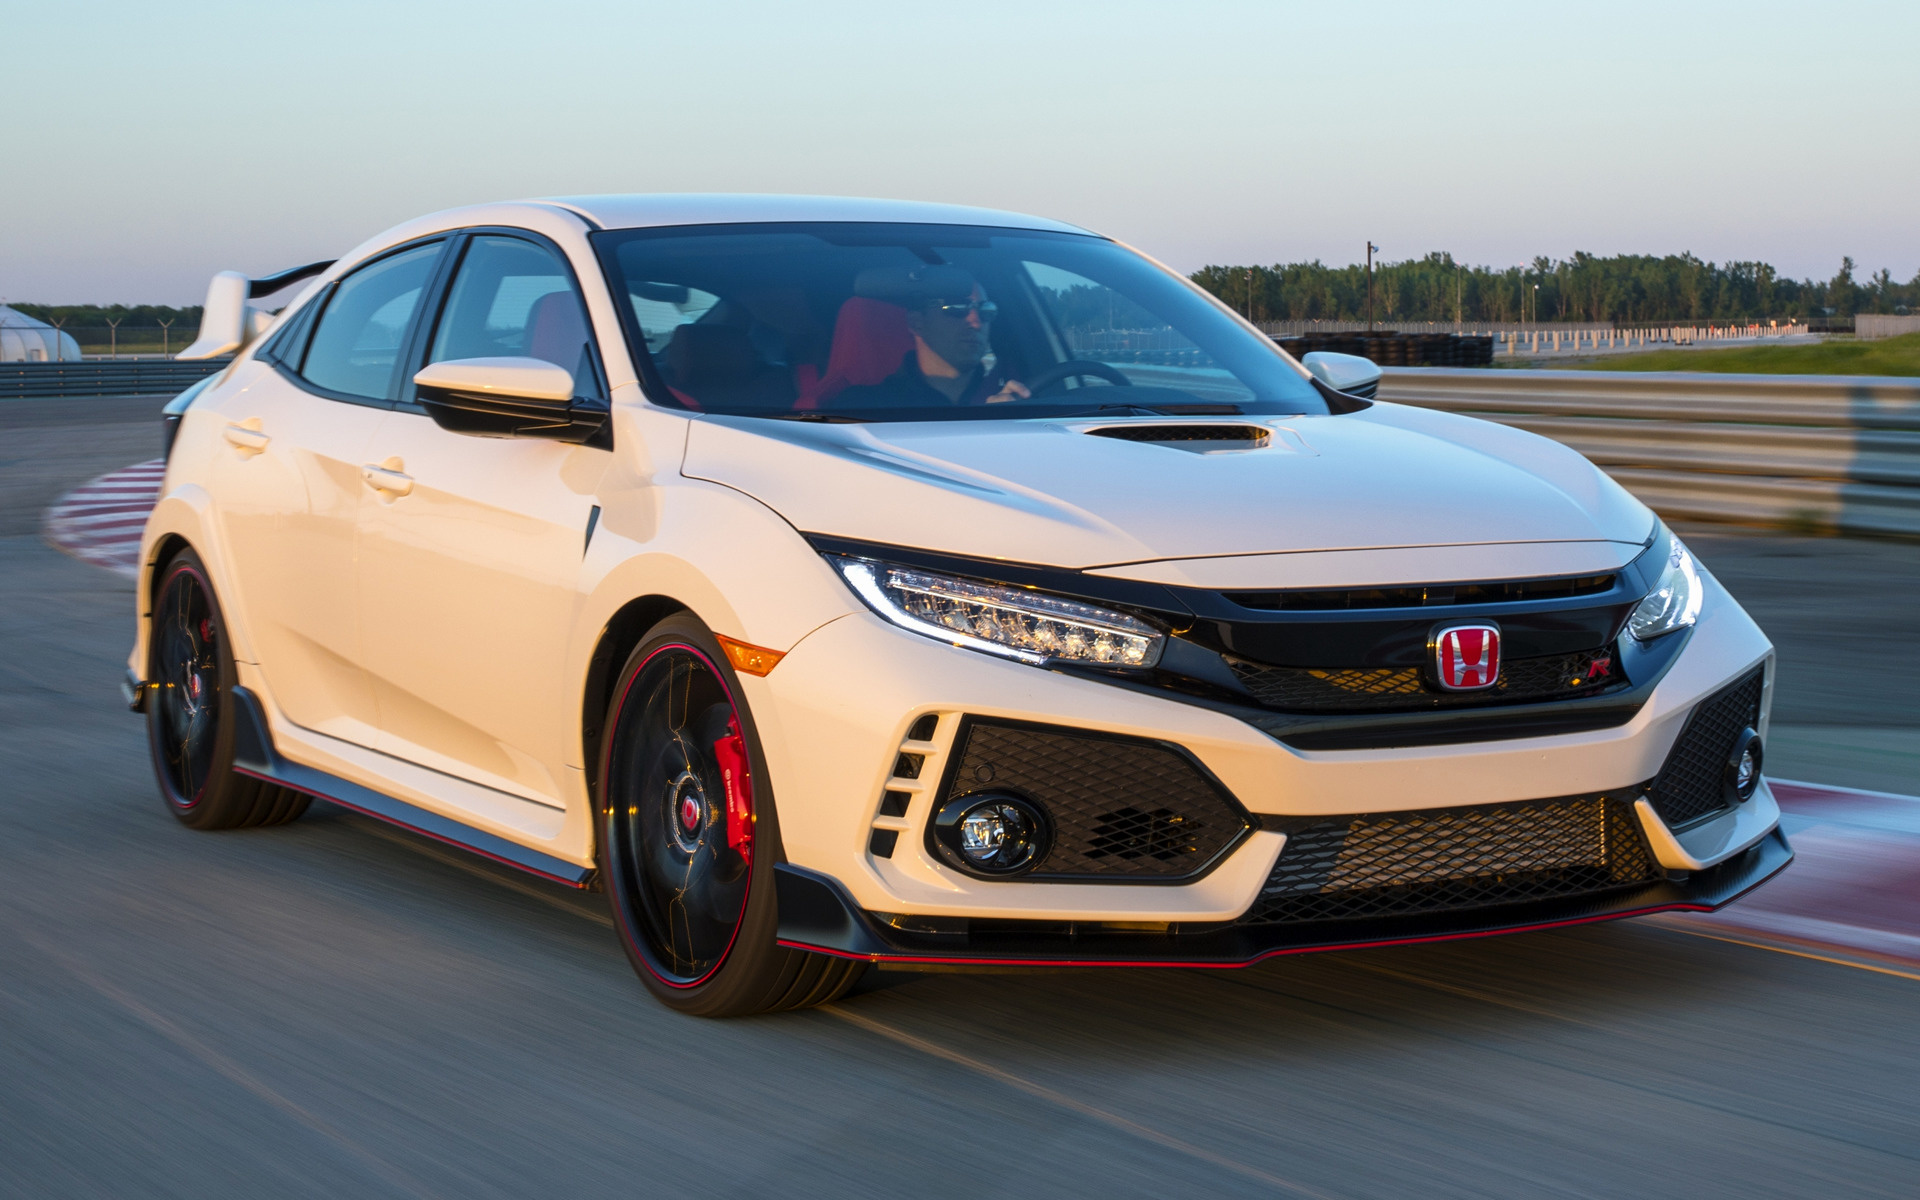 2018 Honda Civic Type R US   Wallpapers and HD Images Car Pixel